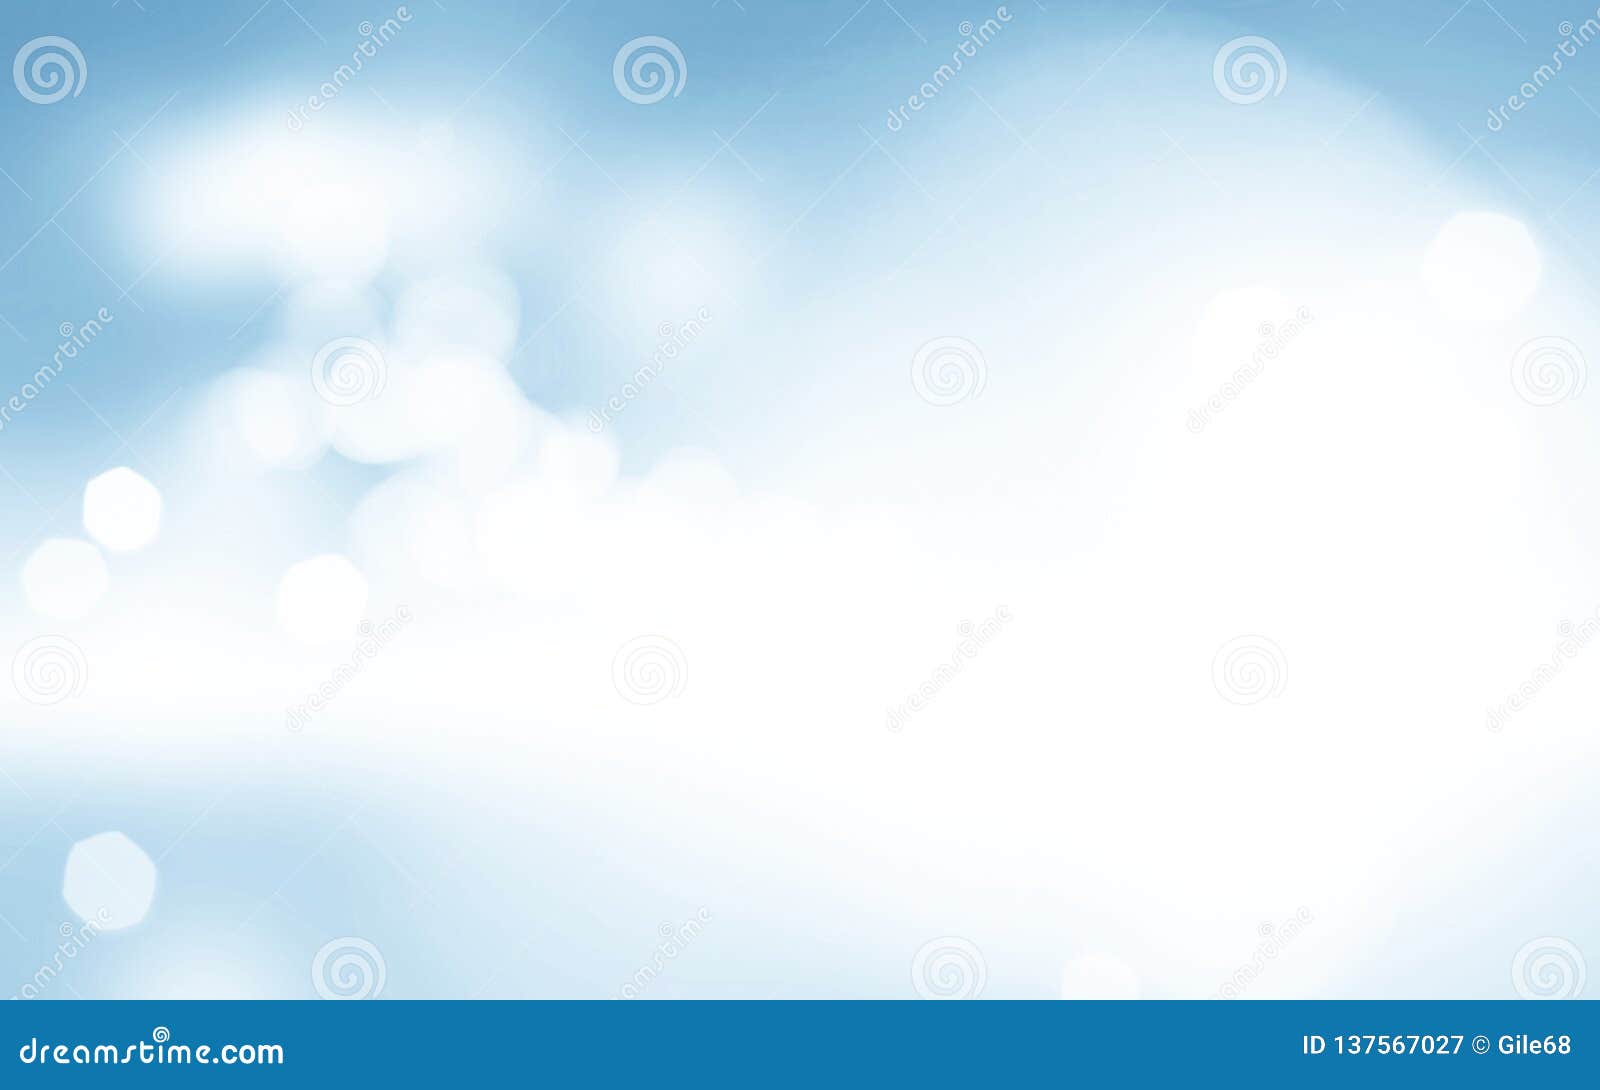 light blue bokeh background blurred sky , cloudy white paint with blue blurry border, fresh spring colors background